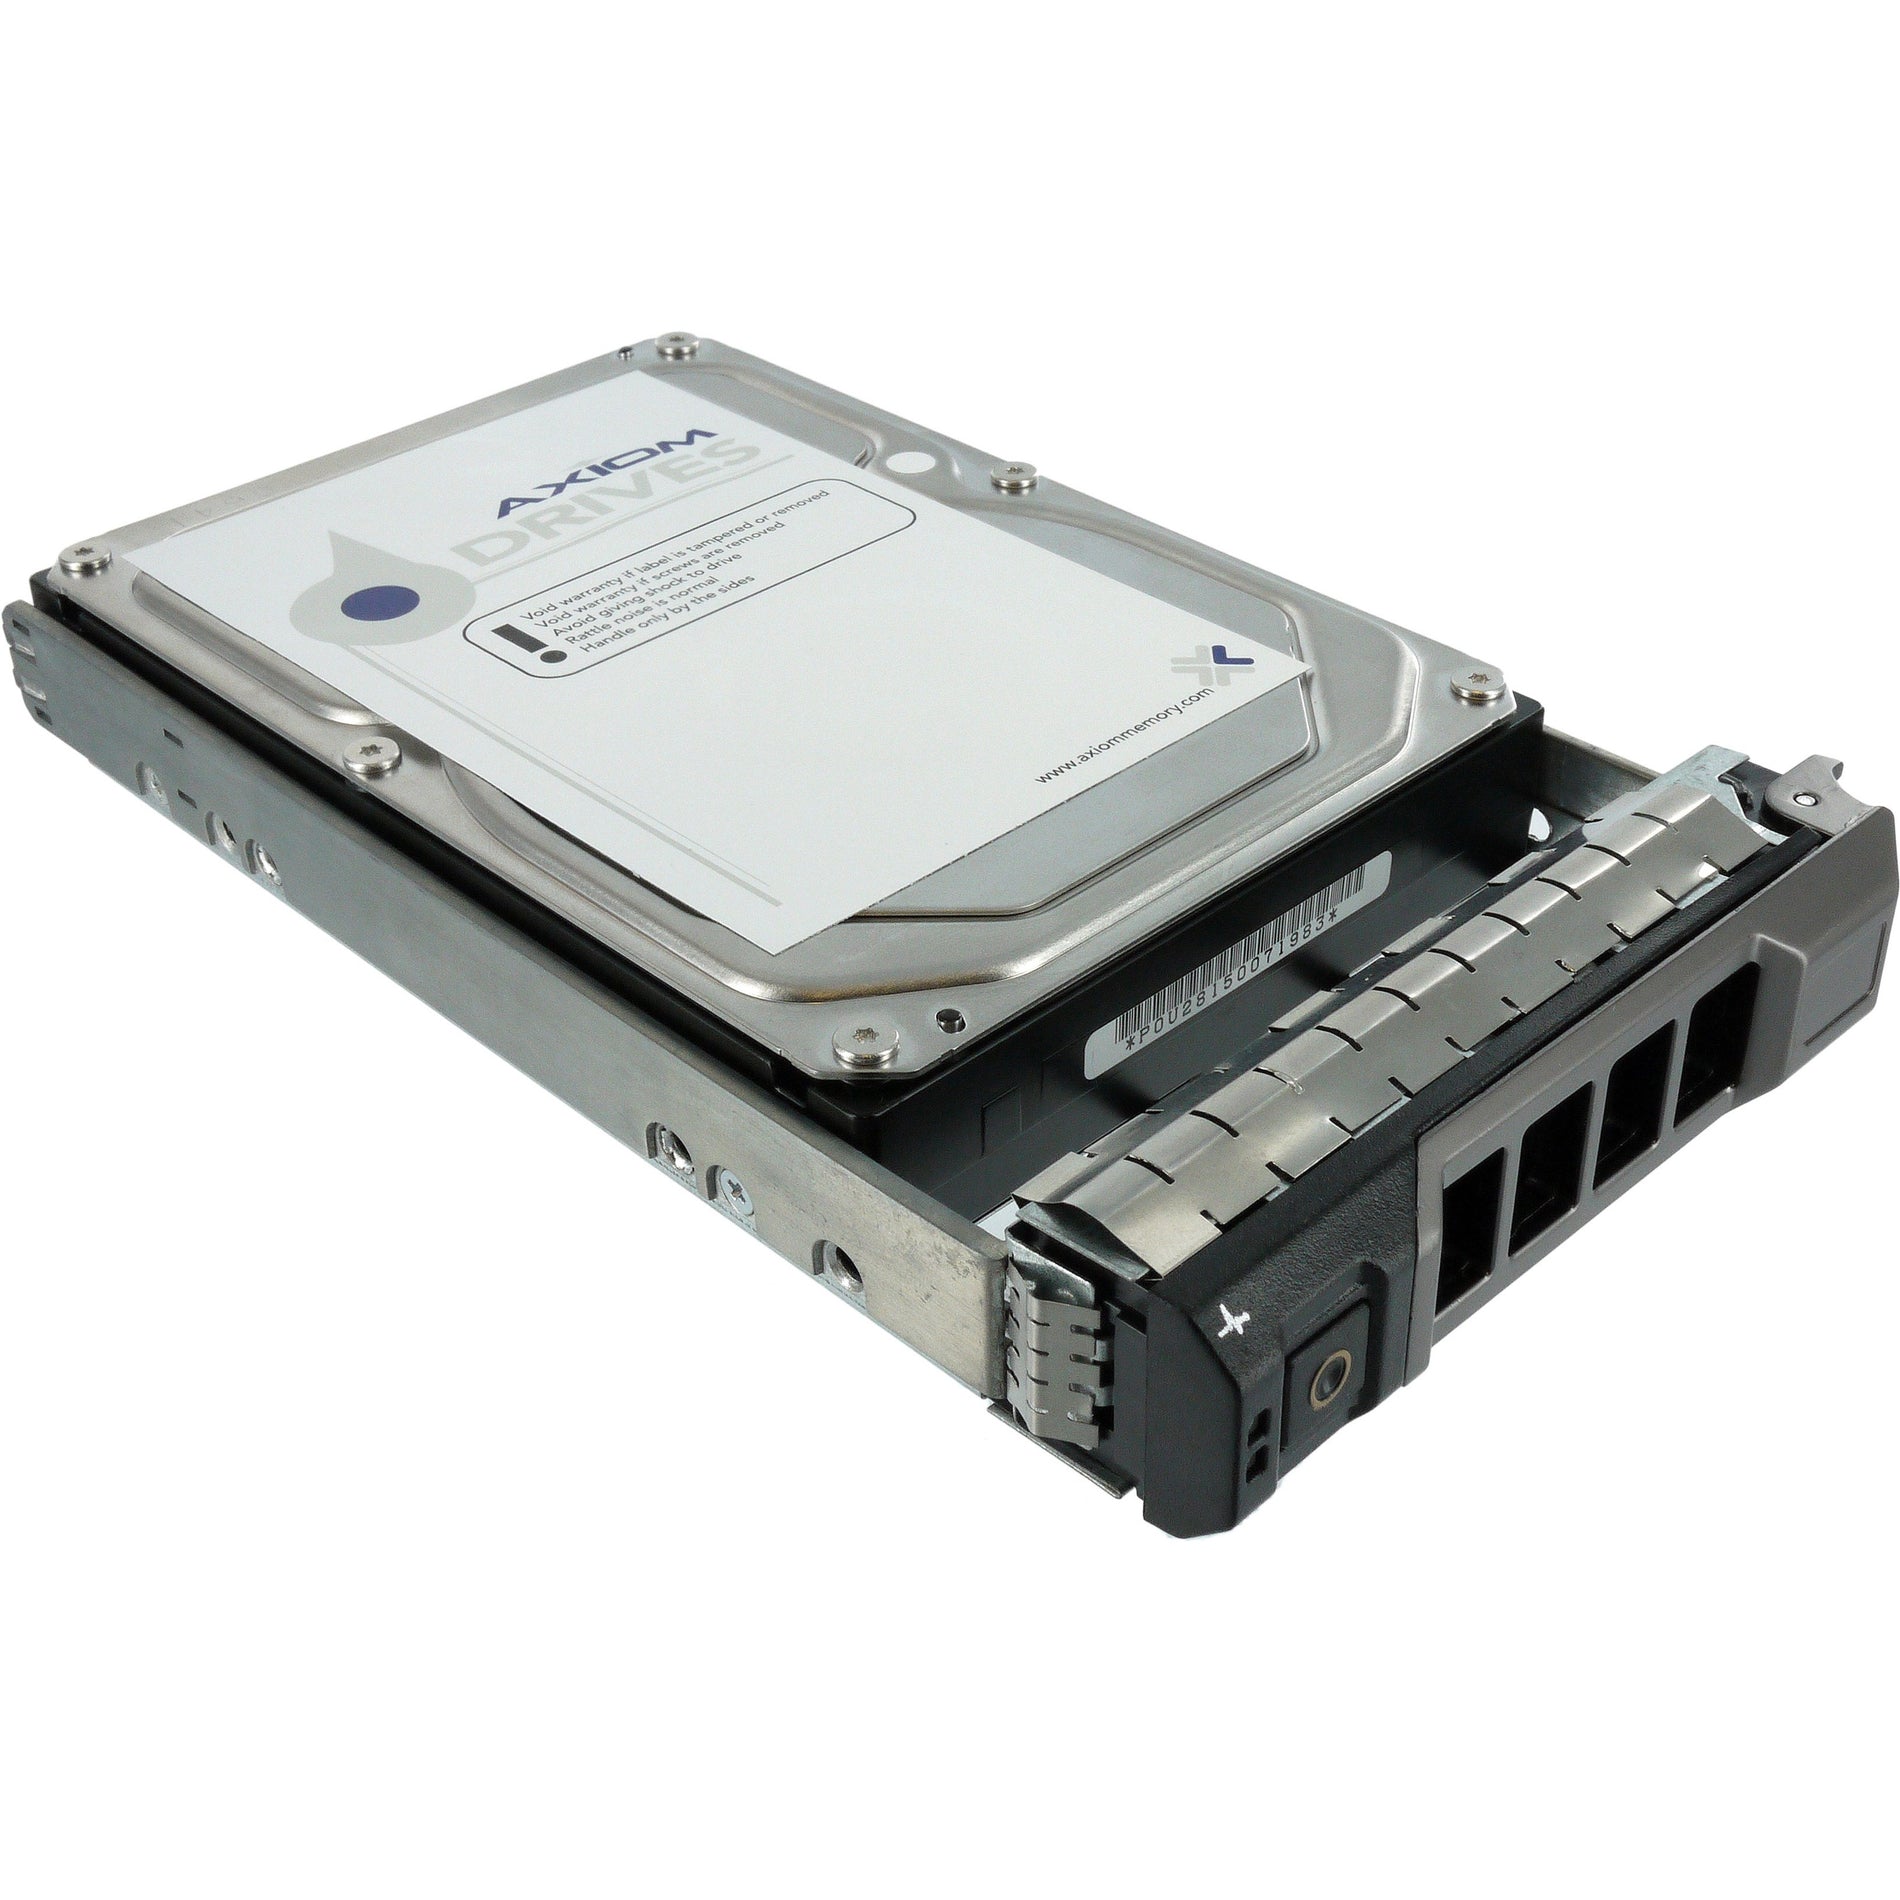 Axiom AXD-PE800072SF6 8TB 6Gb/s SATA 7.2K RPM LFF 512e Hot-Swap HDD for Dell - High Capacity Storage Solution